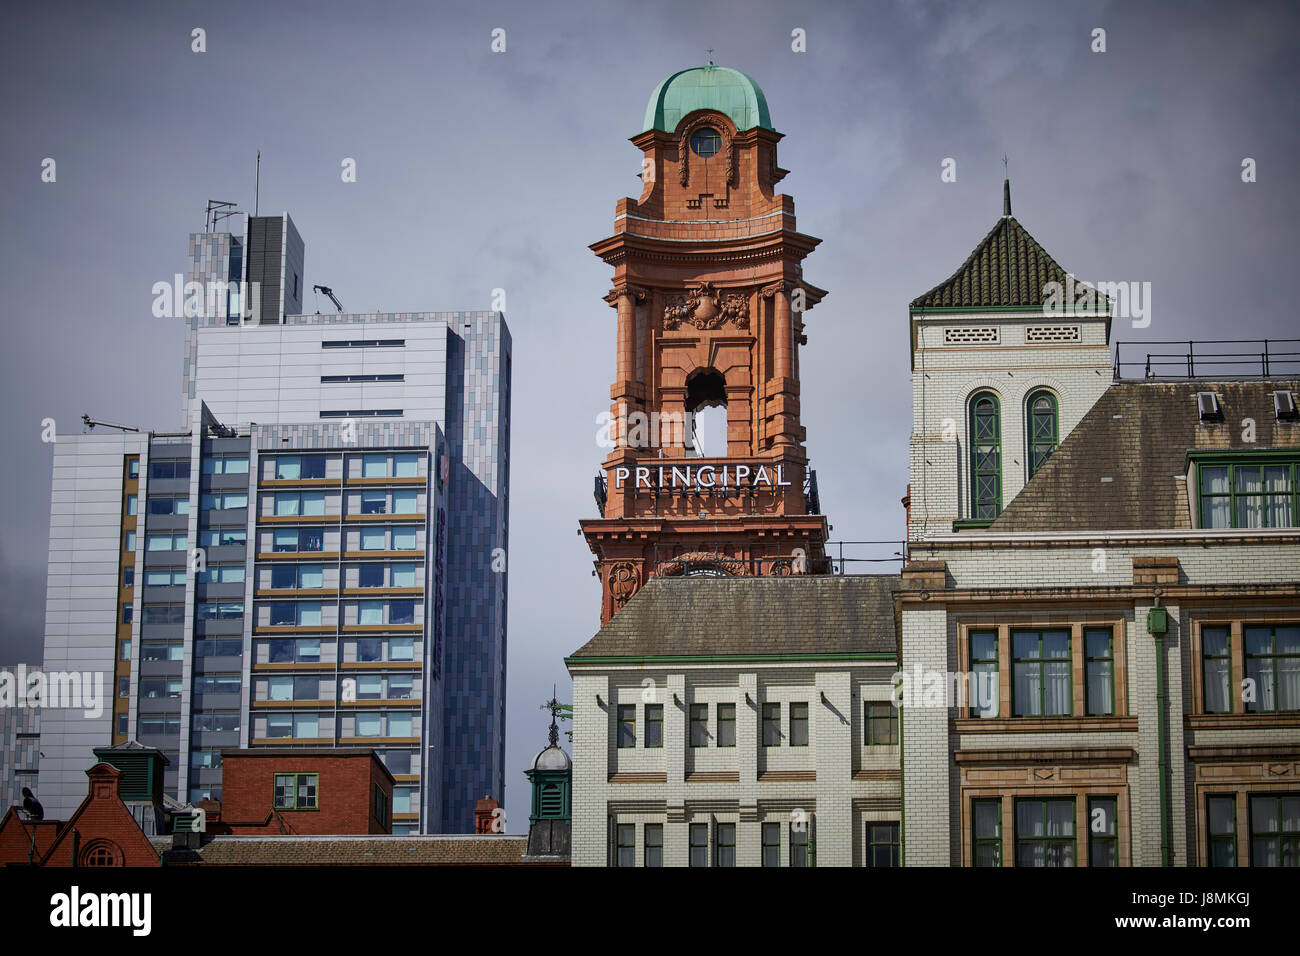 Principle Hotel brick clock tower formerly Palace Hotel and originally Refuge Assurance Building or Refuge Building. Grade II* listed red brick Stock Photo